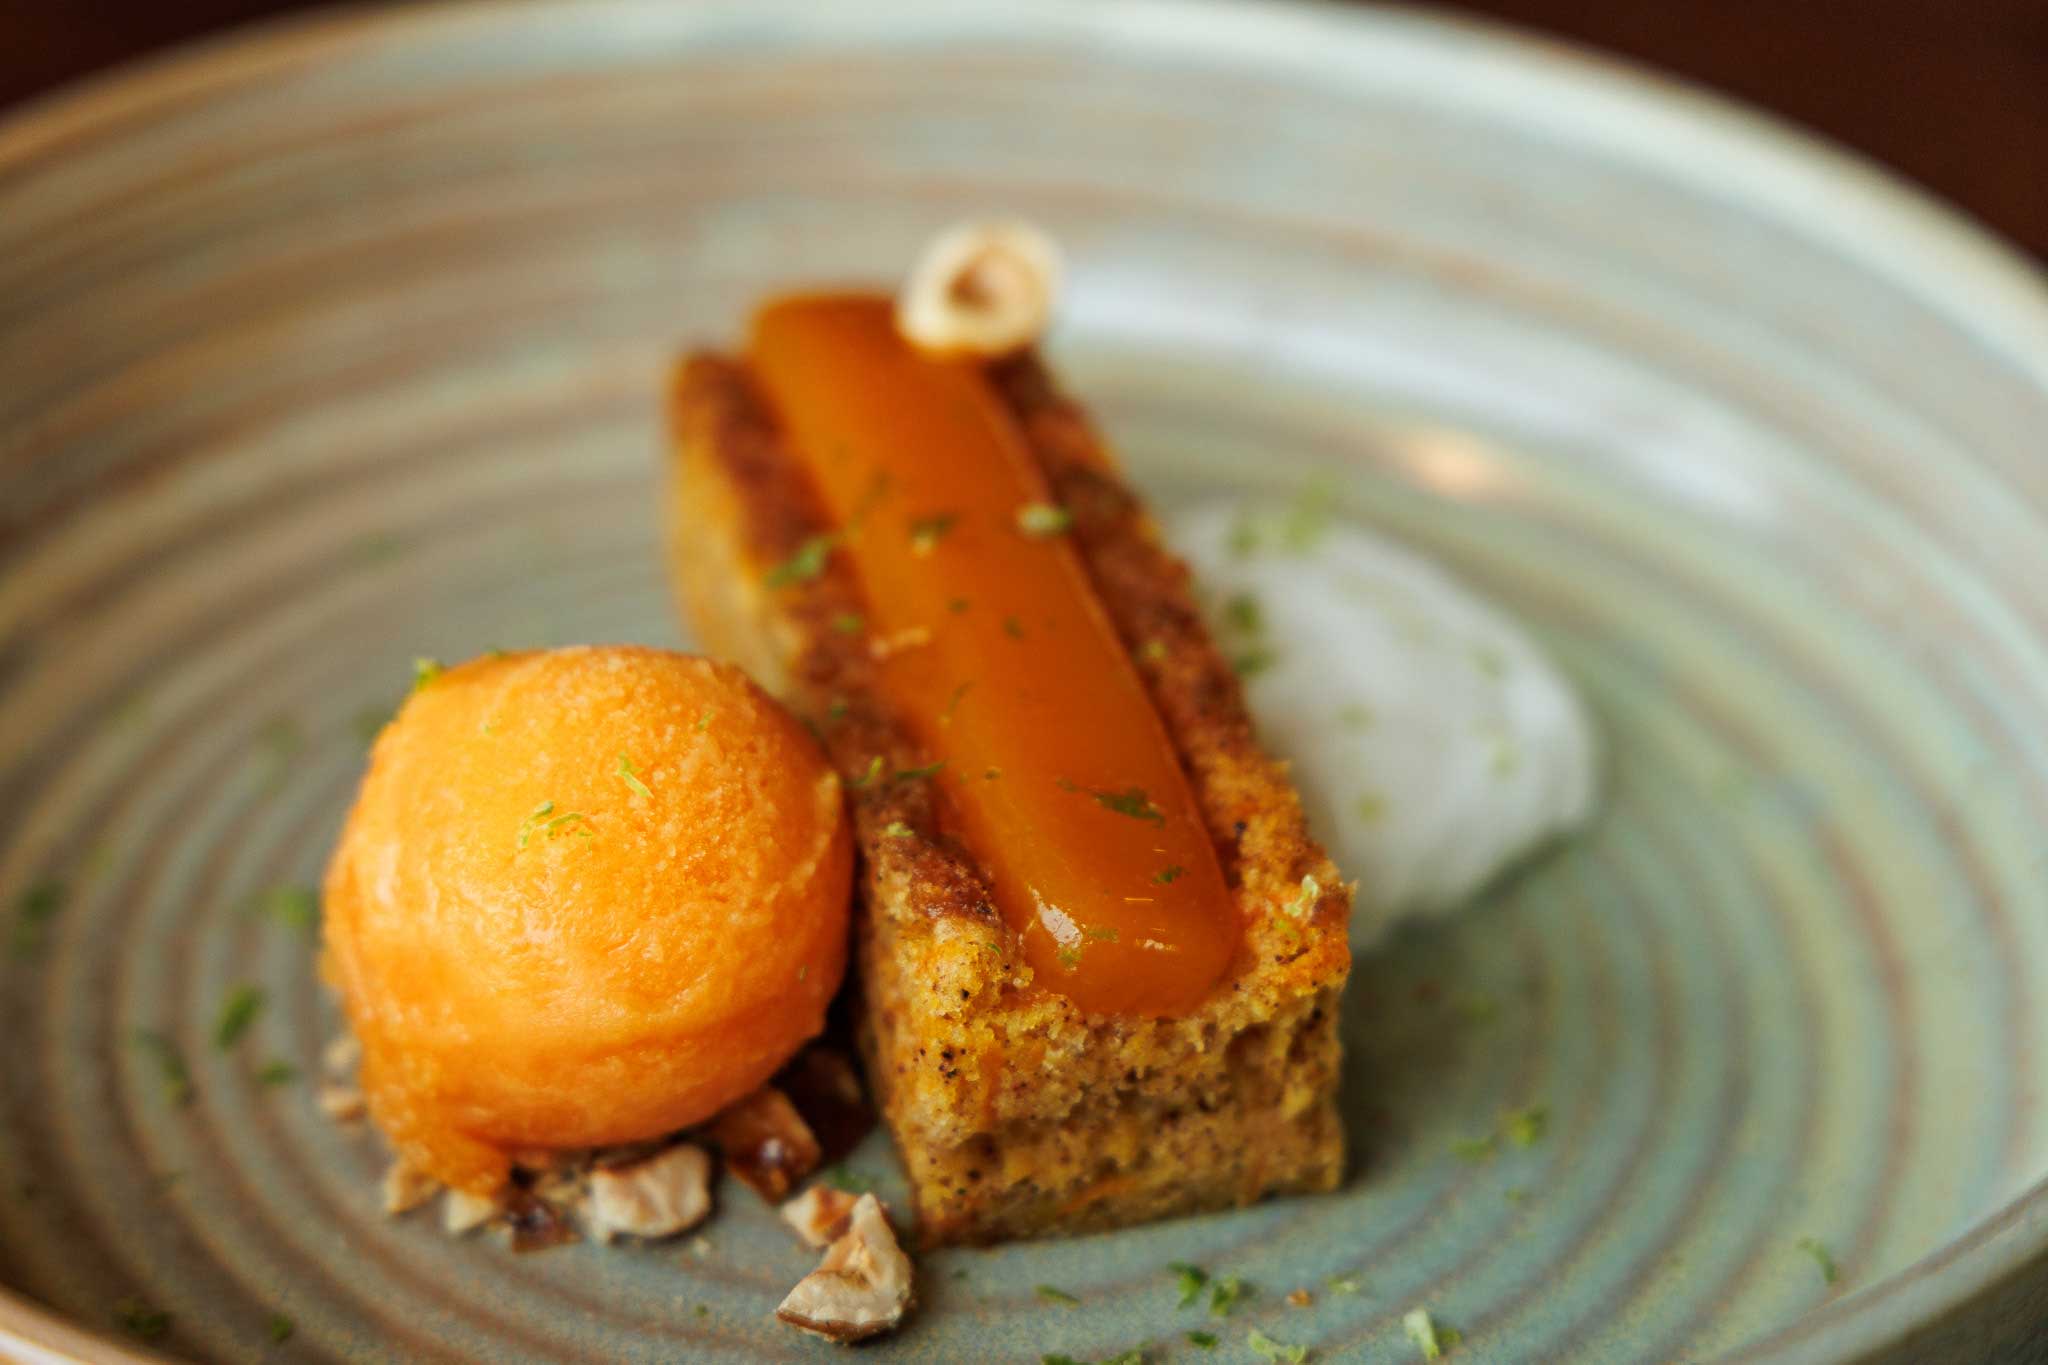 carrot cake served with orange-carrot sorbet, coconut cream, and passion fruit gelee